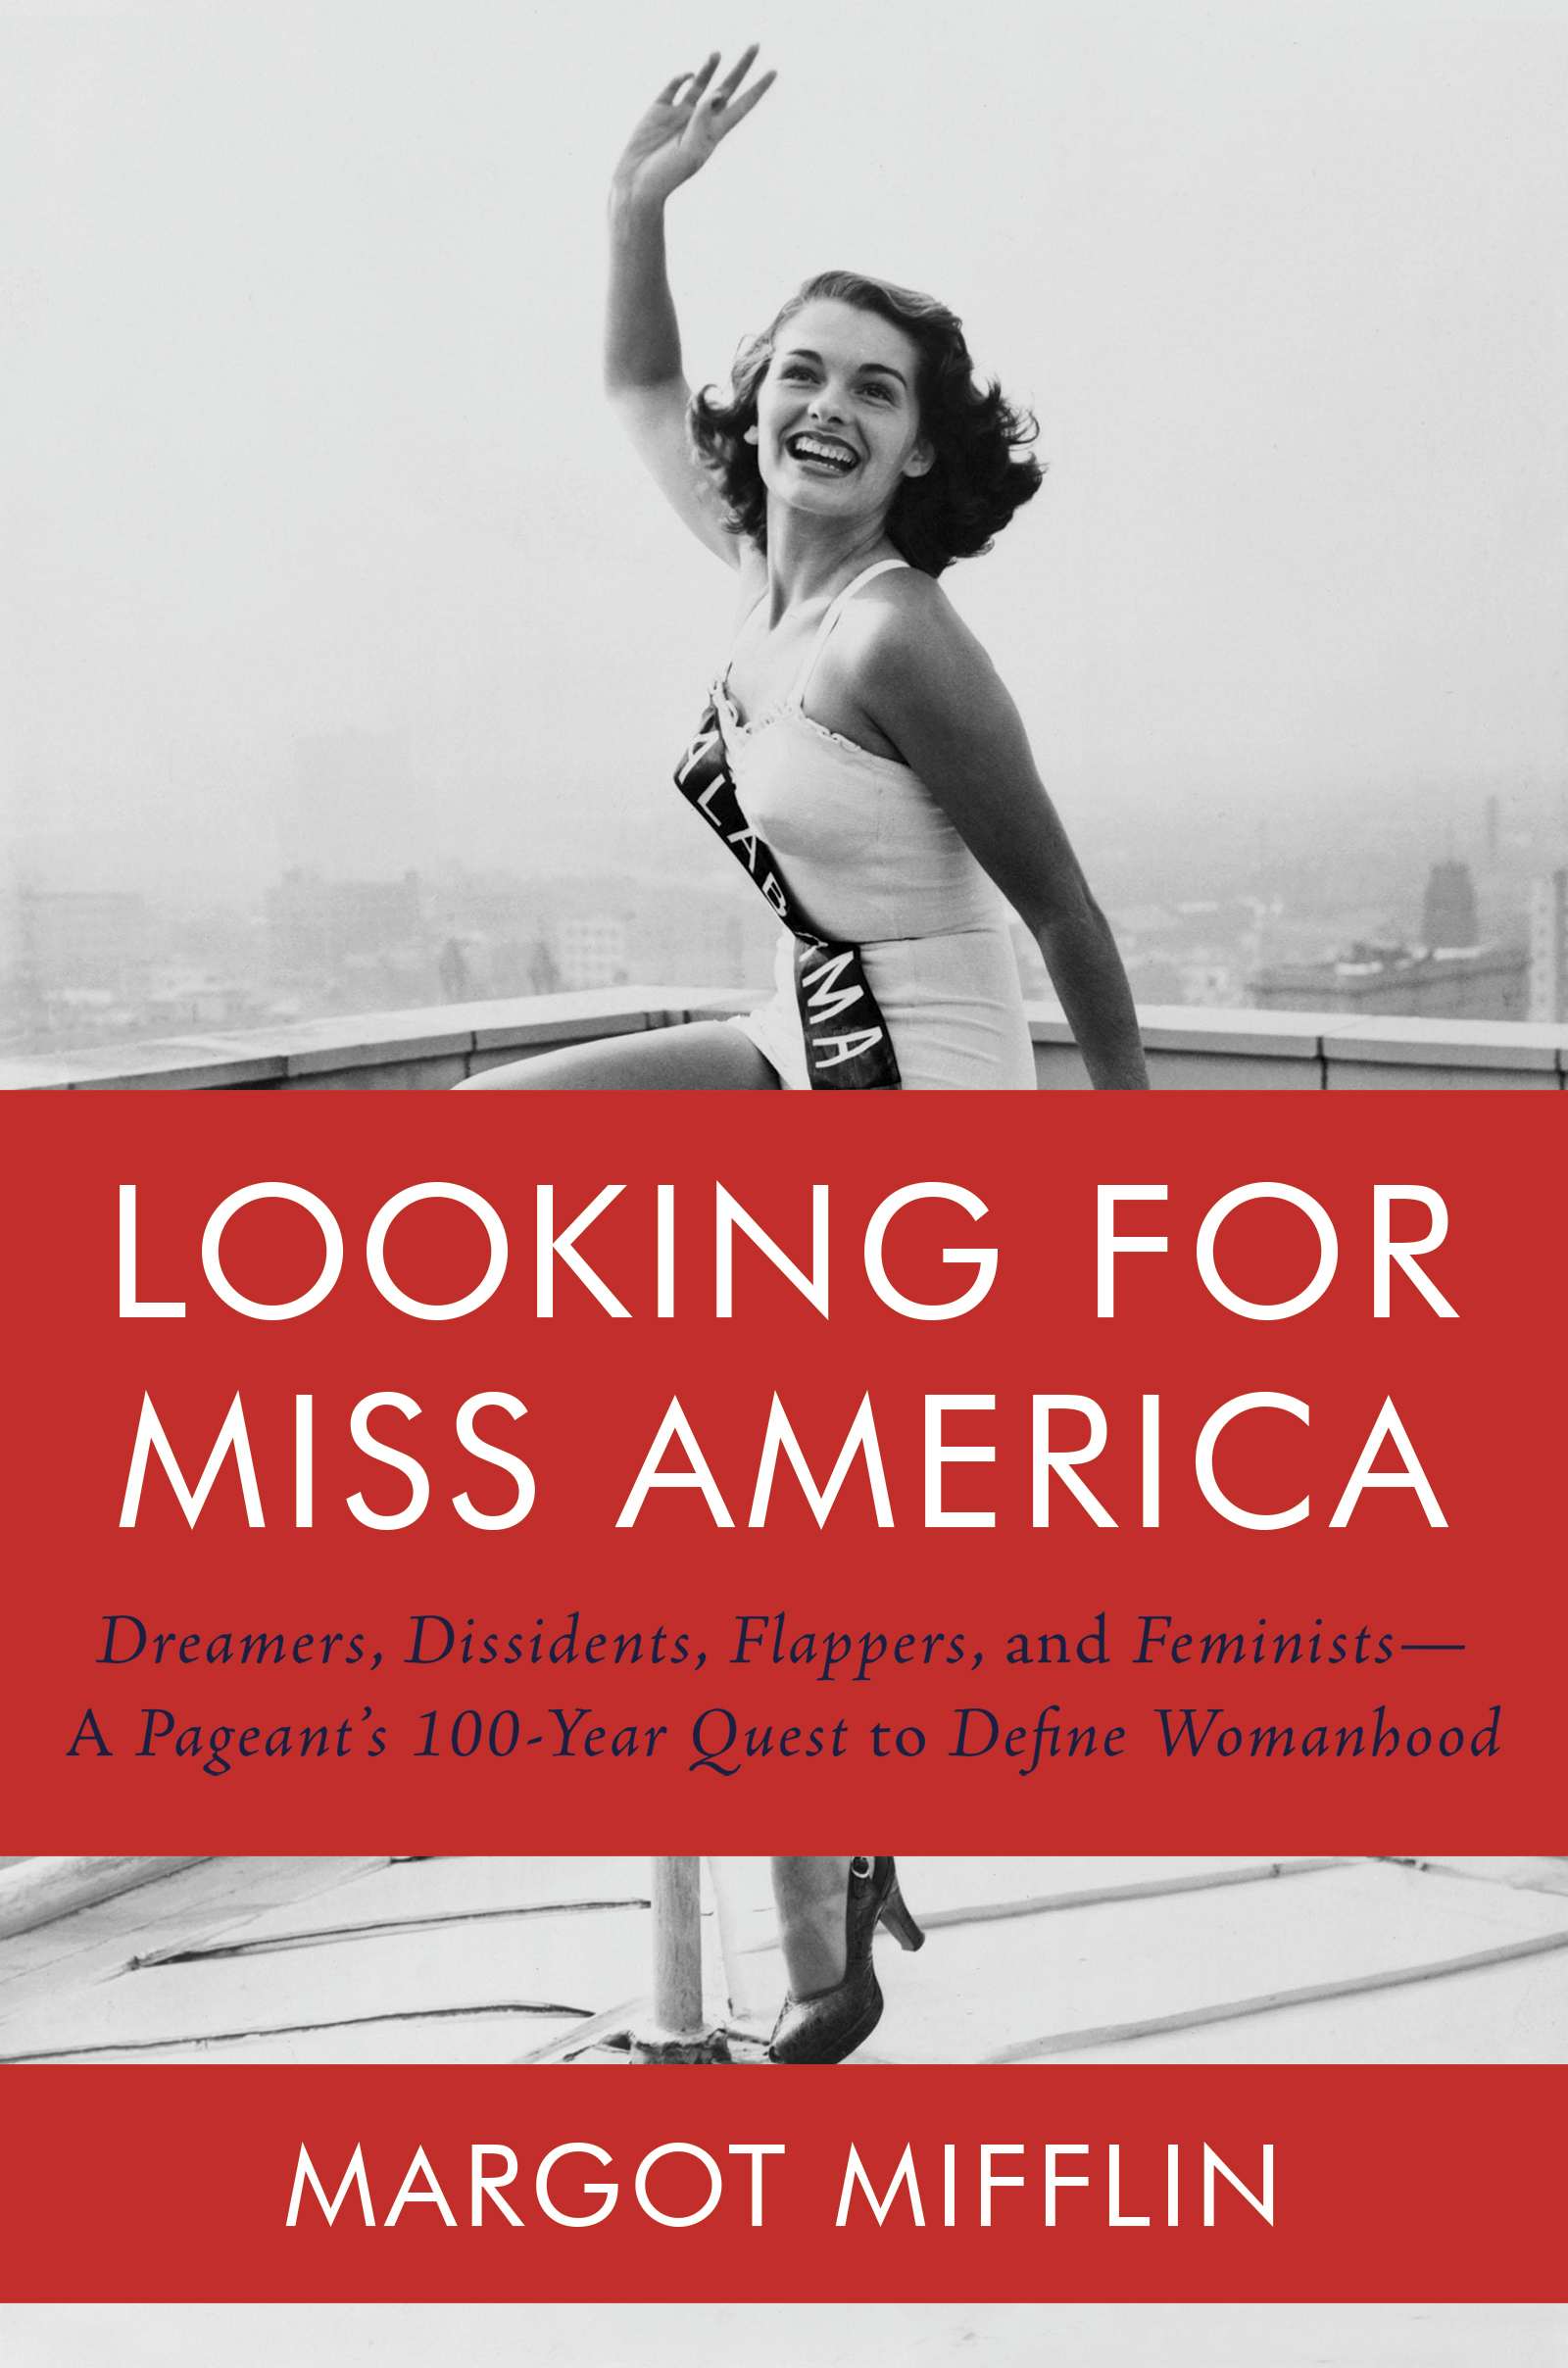 Virtual Book Launch: Looking for Miss America by Margot Mifflin in conversation with Jessica Bennett